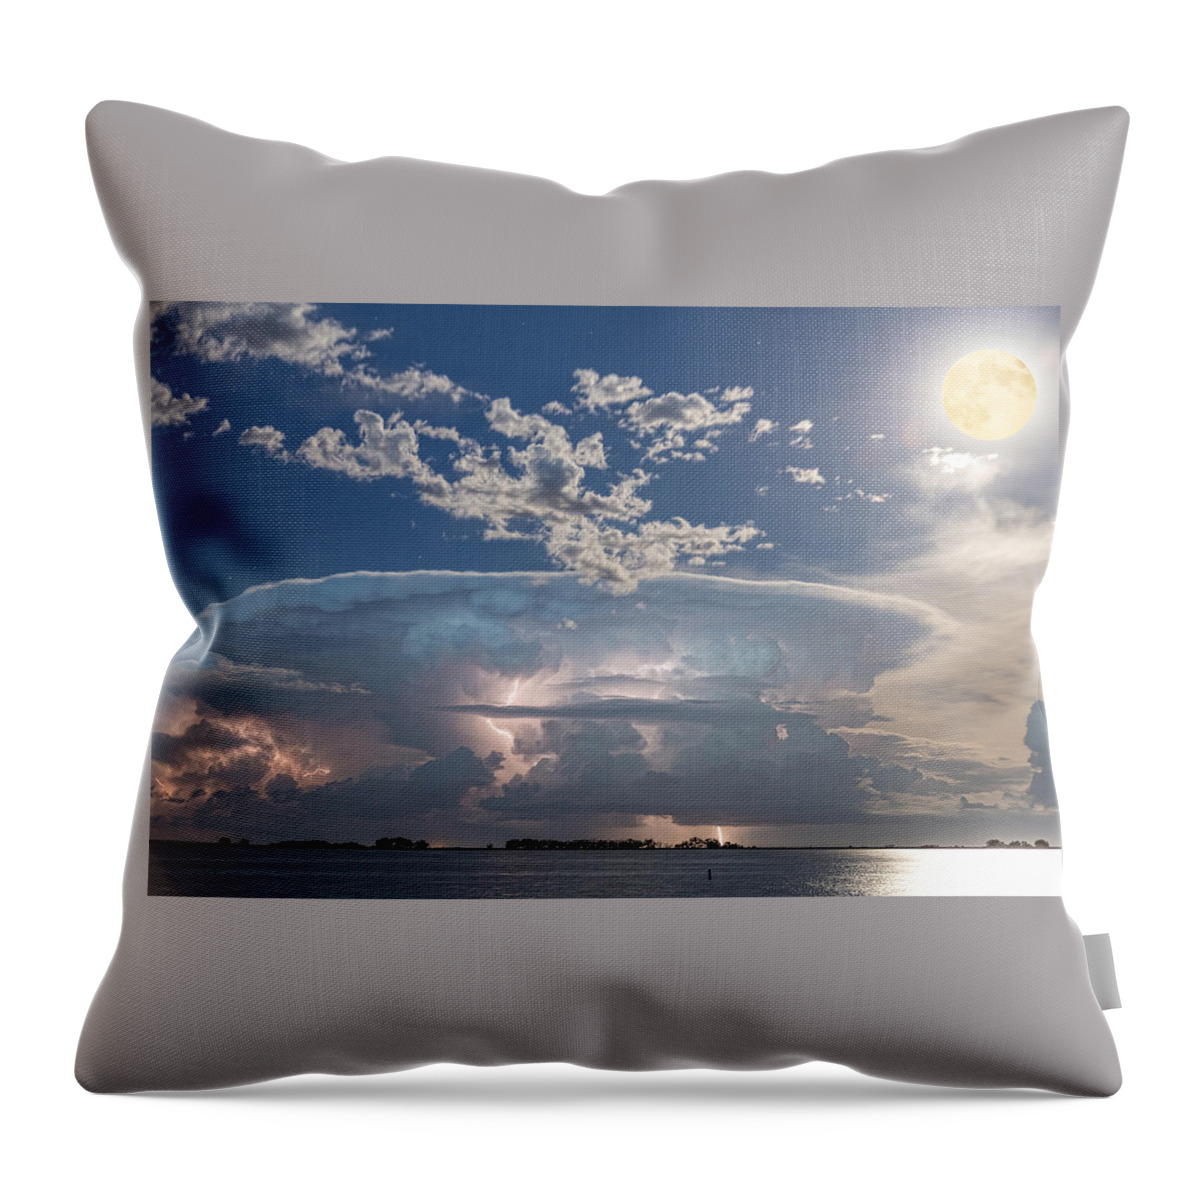 Storm Throw Pillow featuring the photograph Lake Side Storm Watching With Full Moon by James BO Insogna